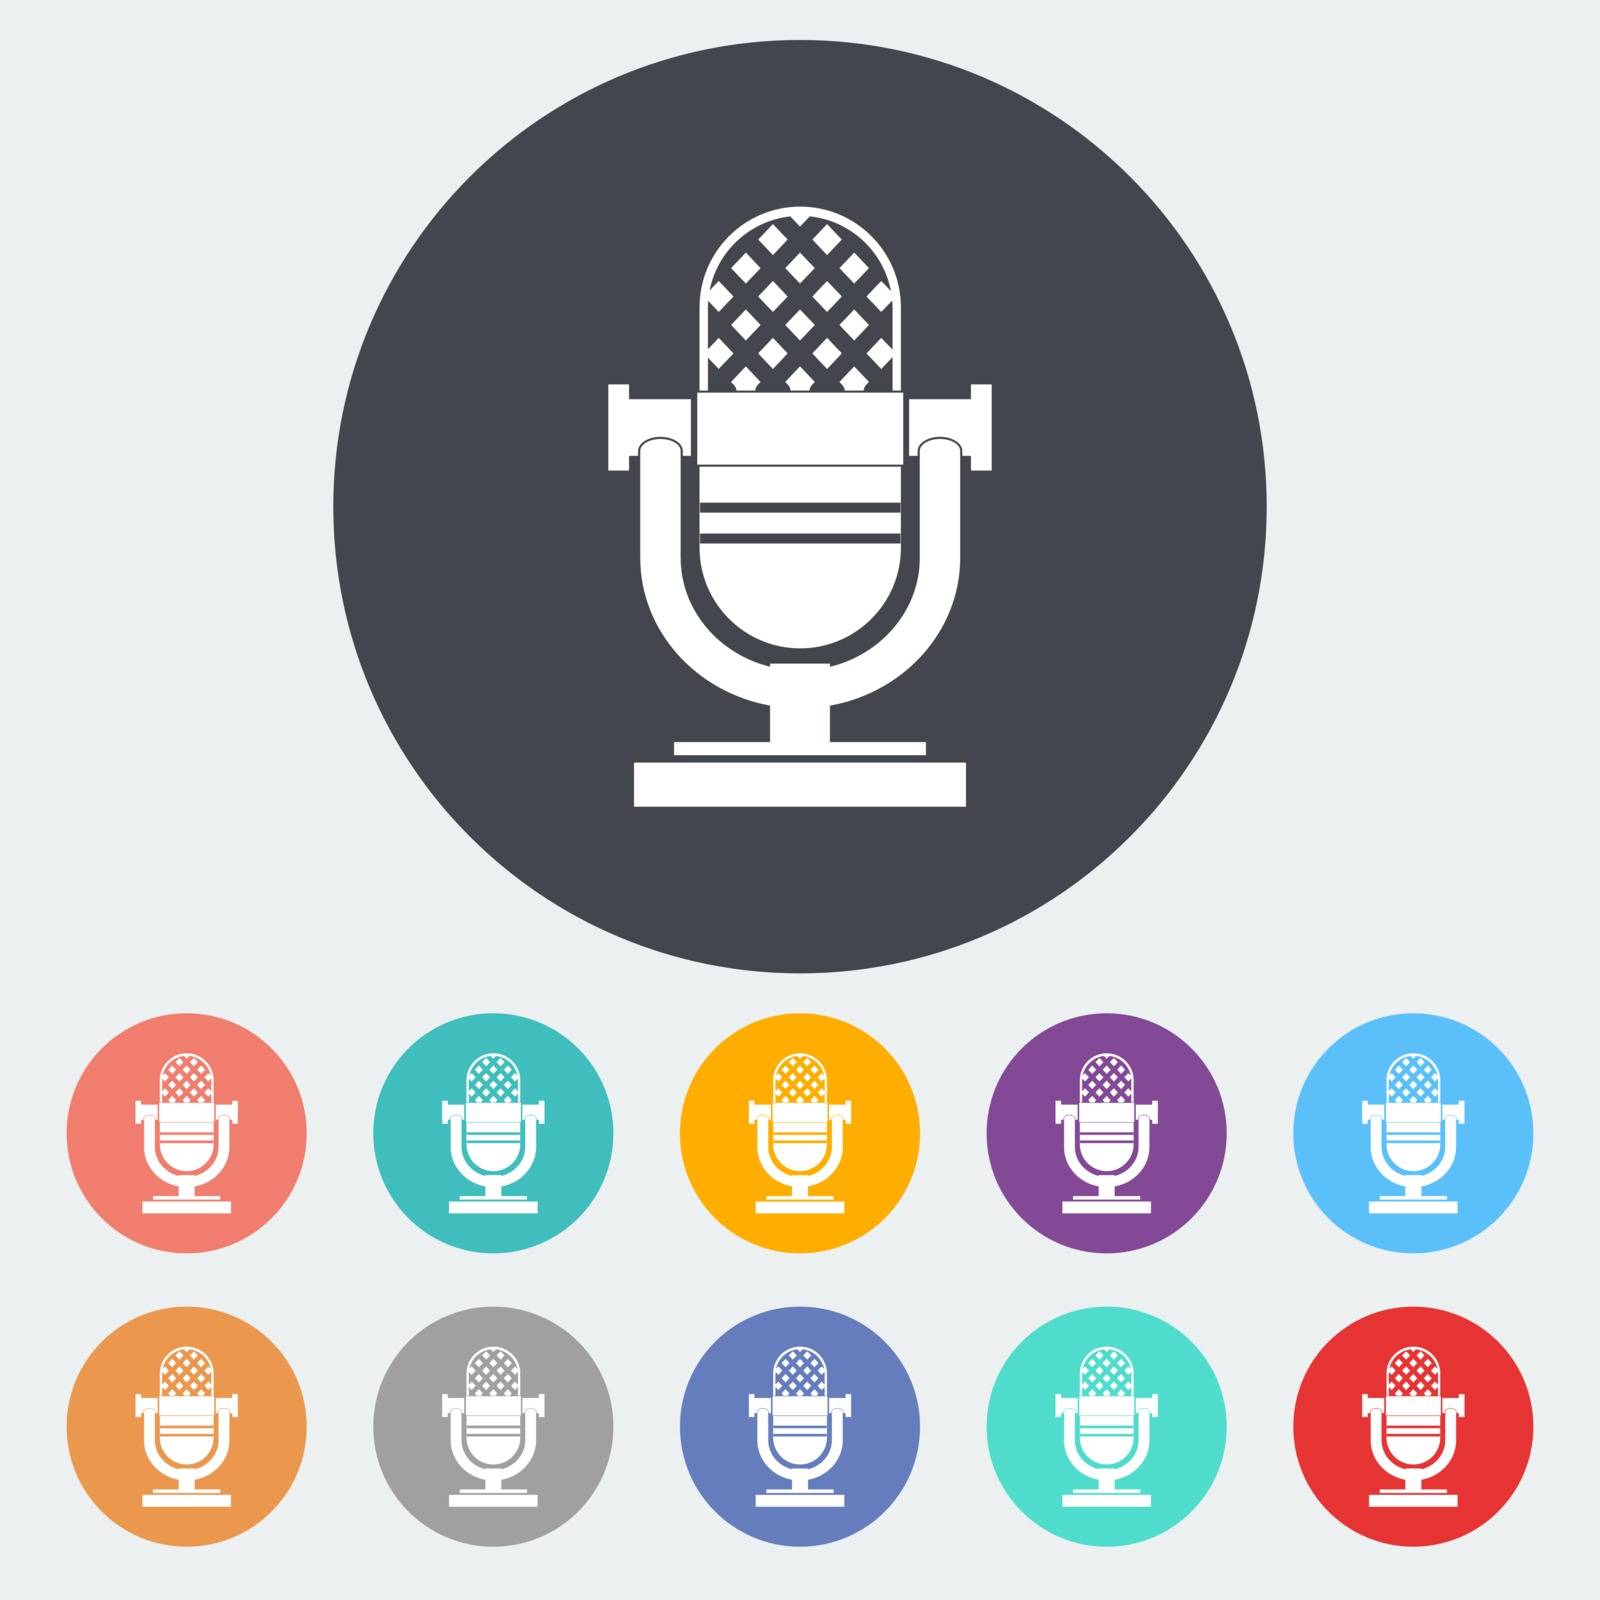 Vintage microphone. Single flat icon on the circle. Vector illustration.